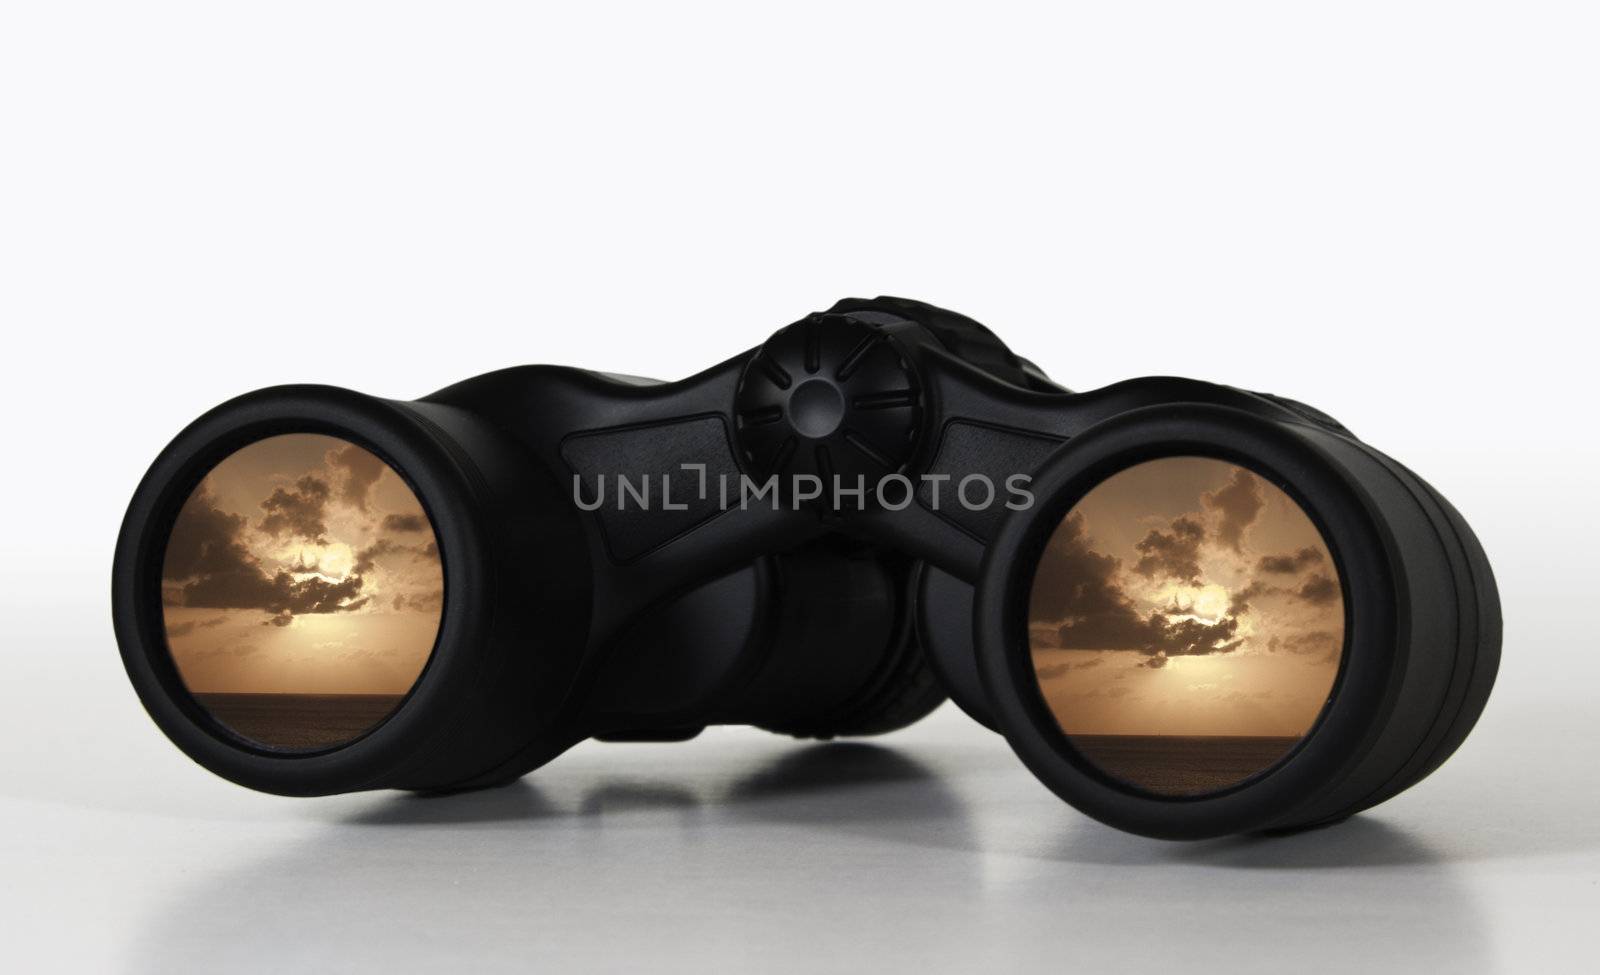 Binoculars with rosy sunset view by steheap